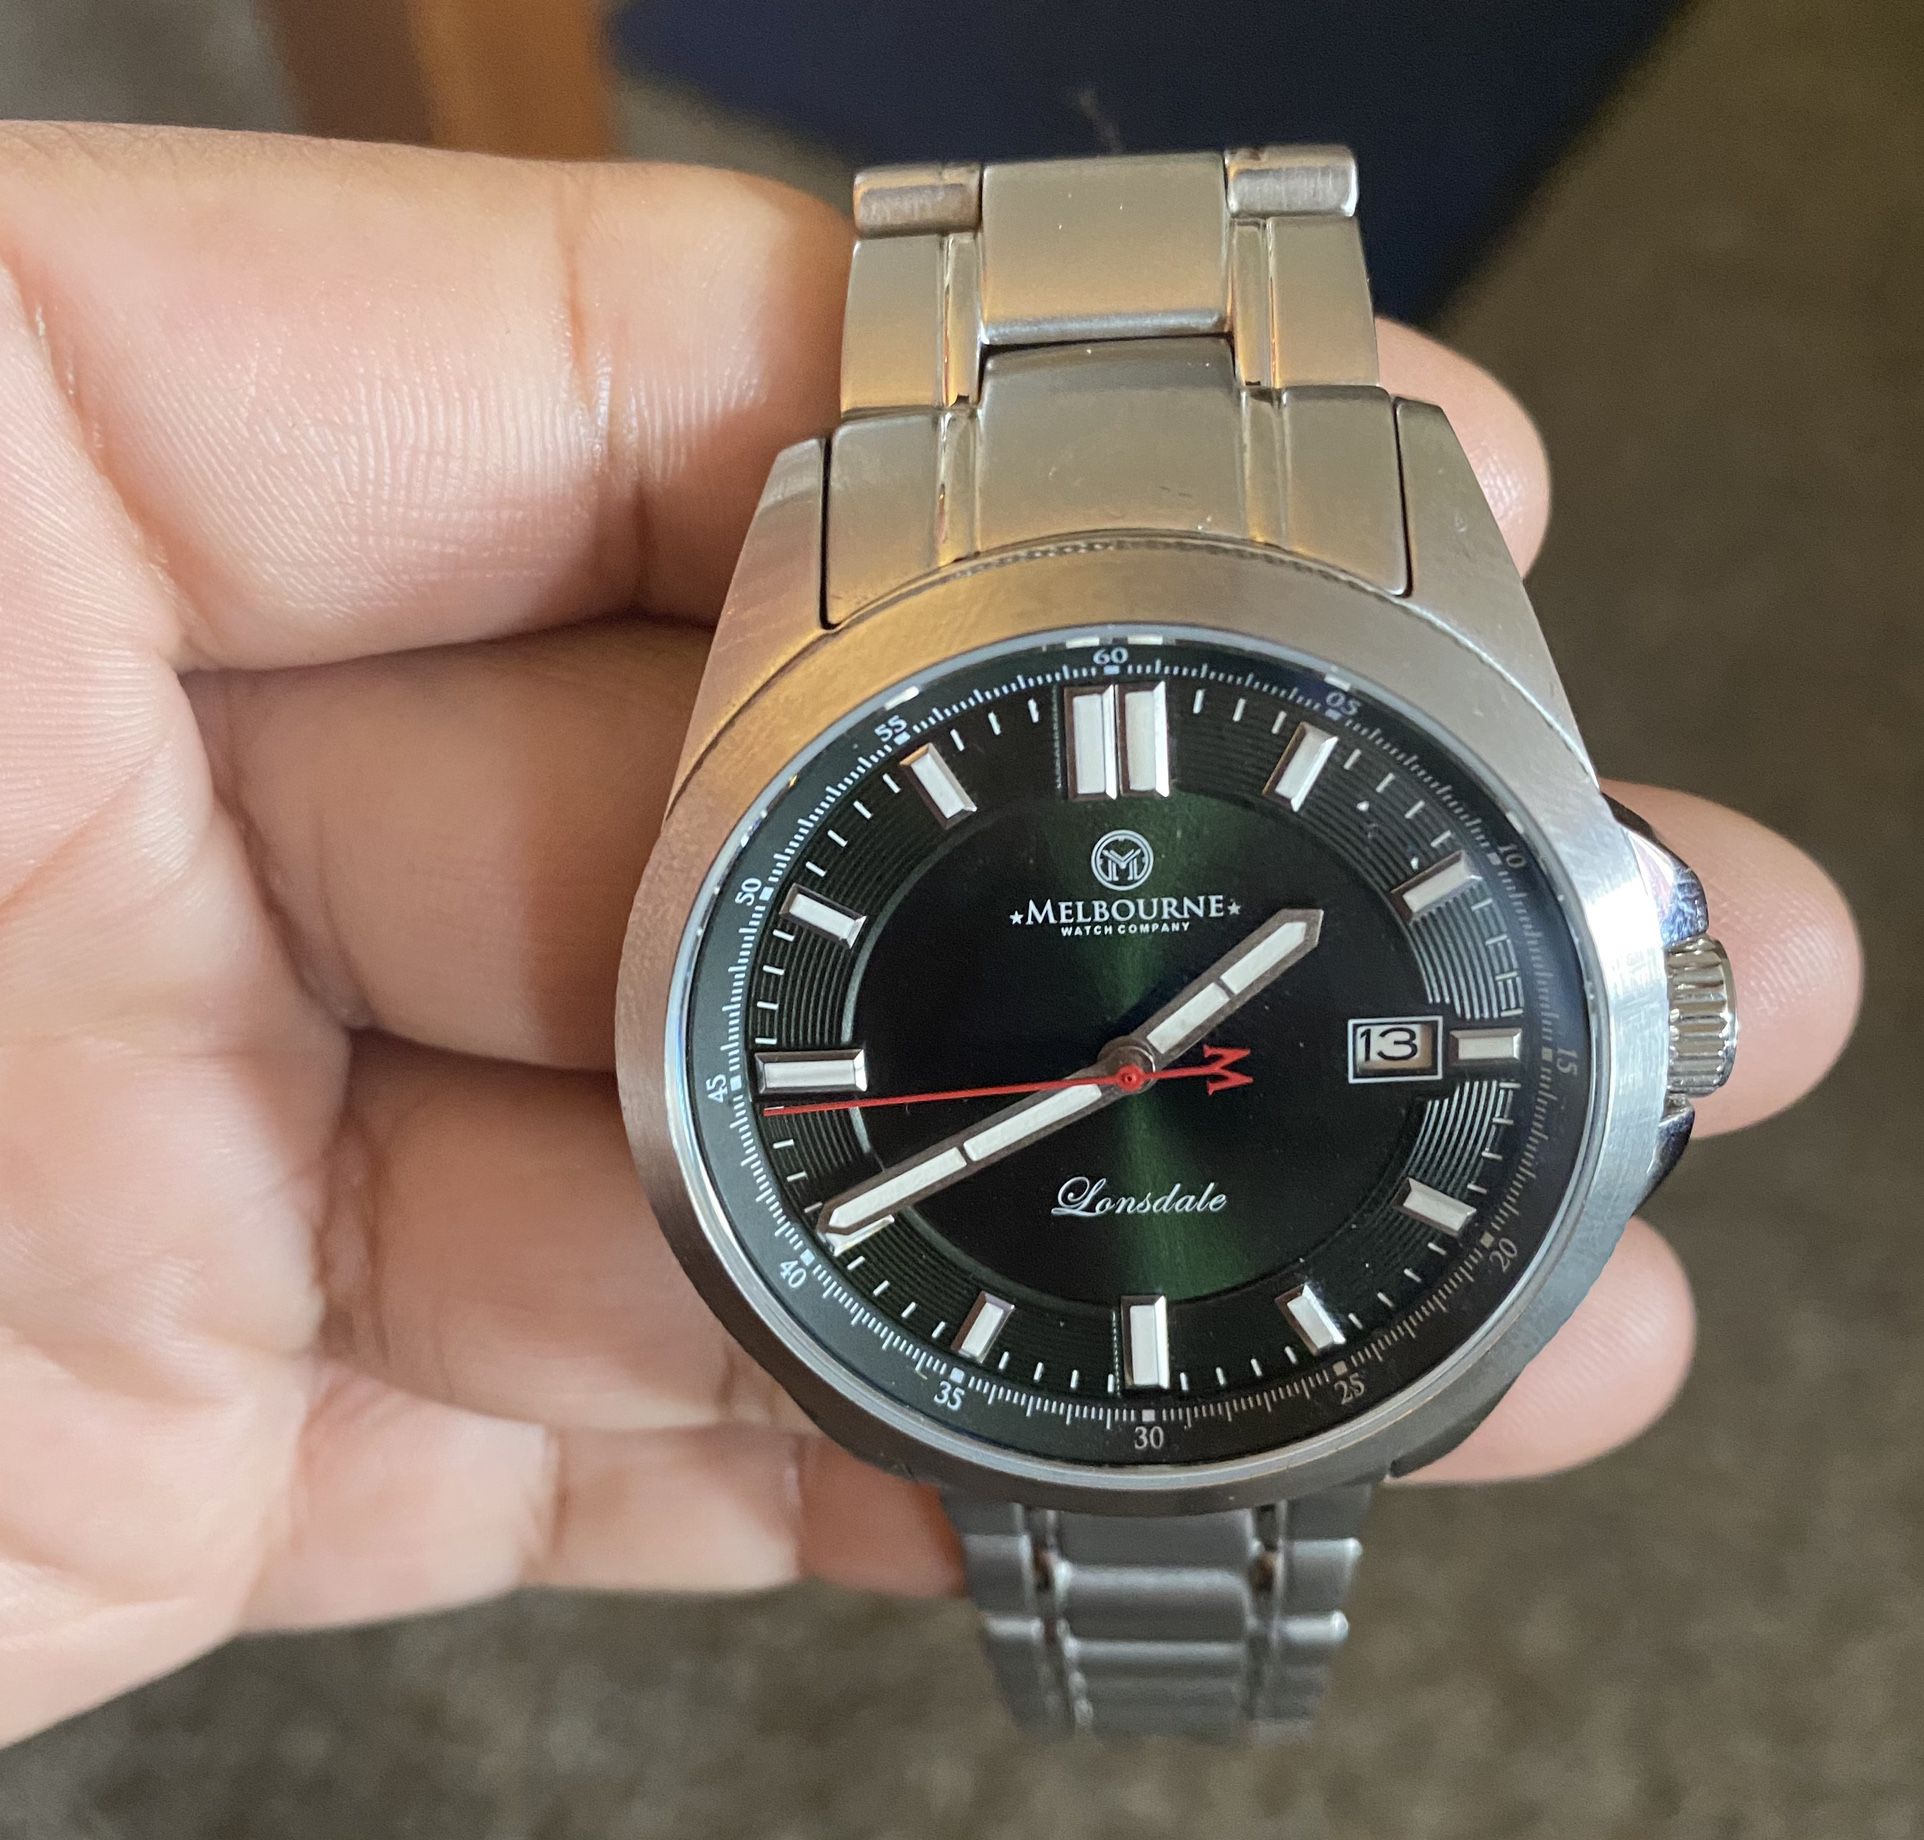 Melbourne Lonsdale Automatic Stainless Steel Greenface Mens Watch $150 OBO